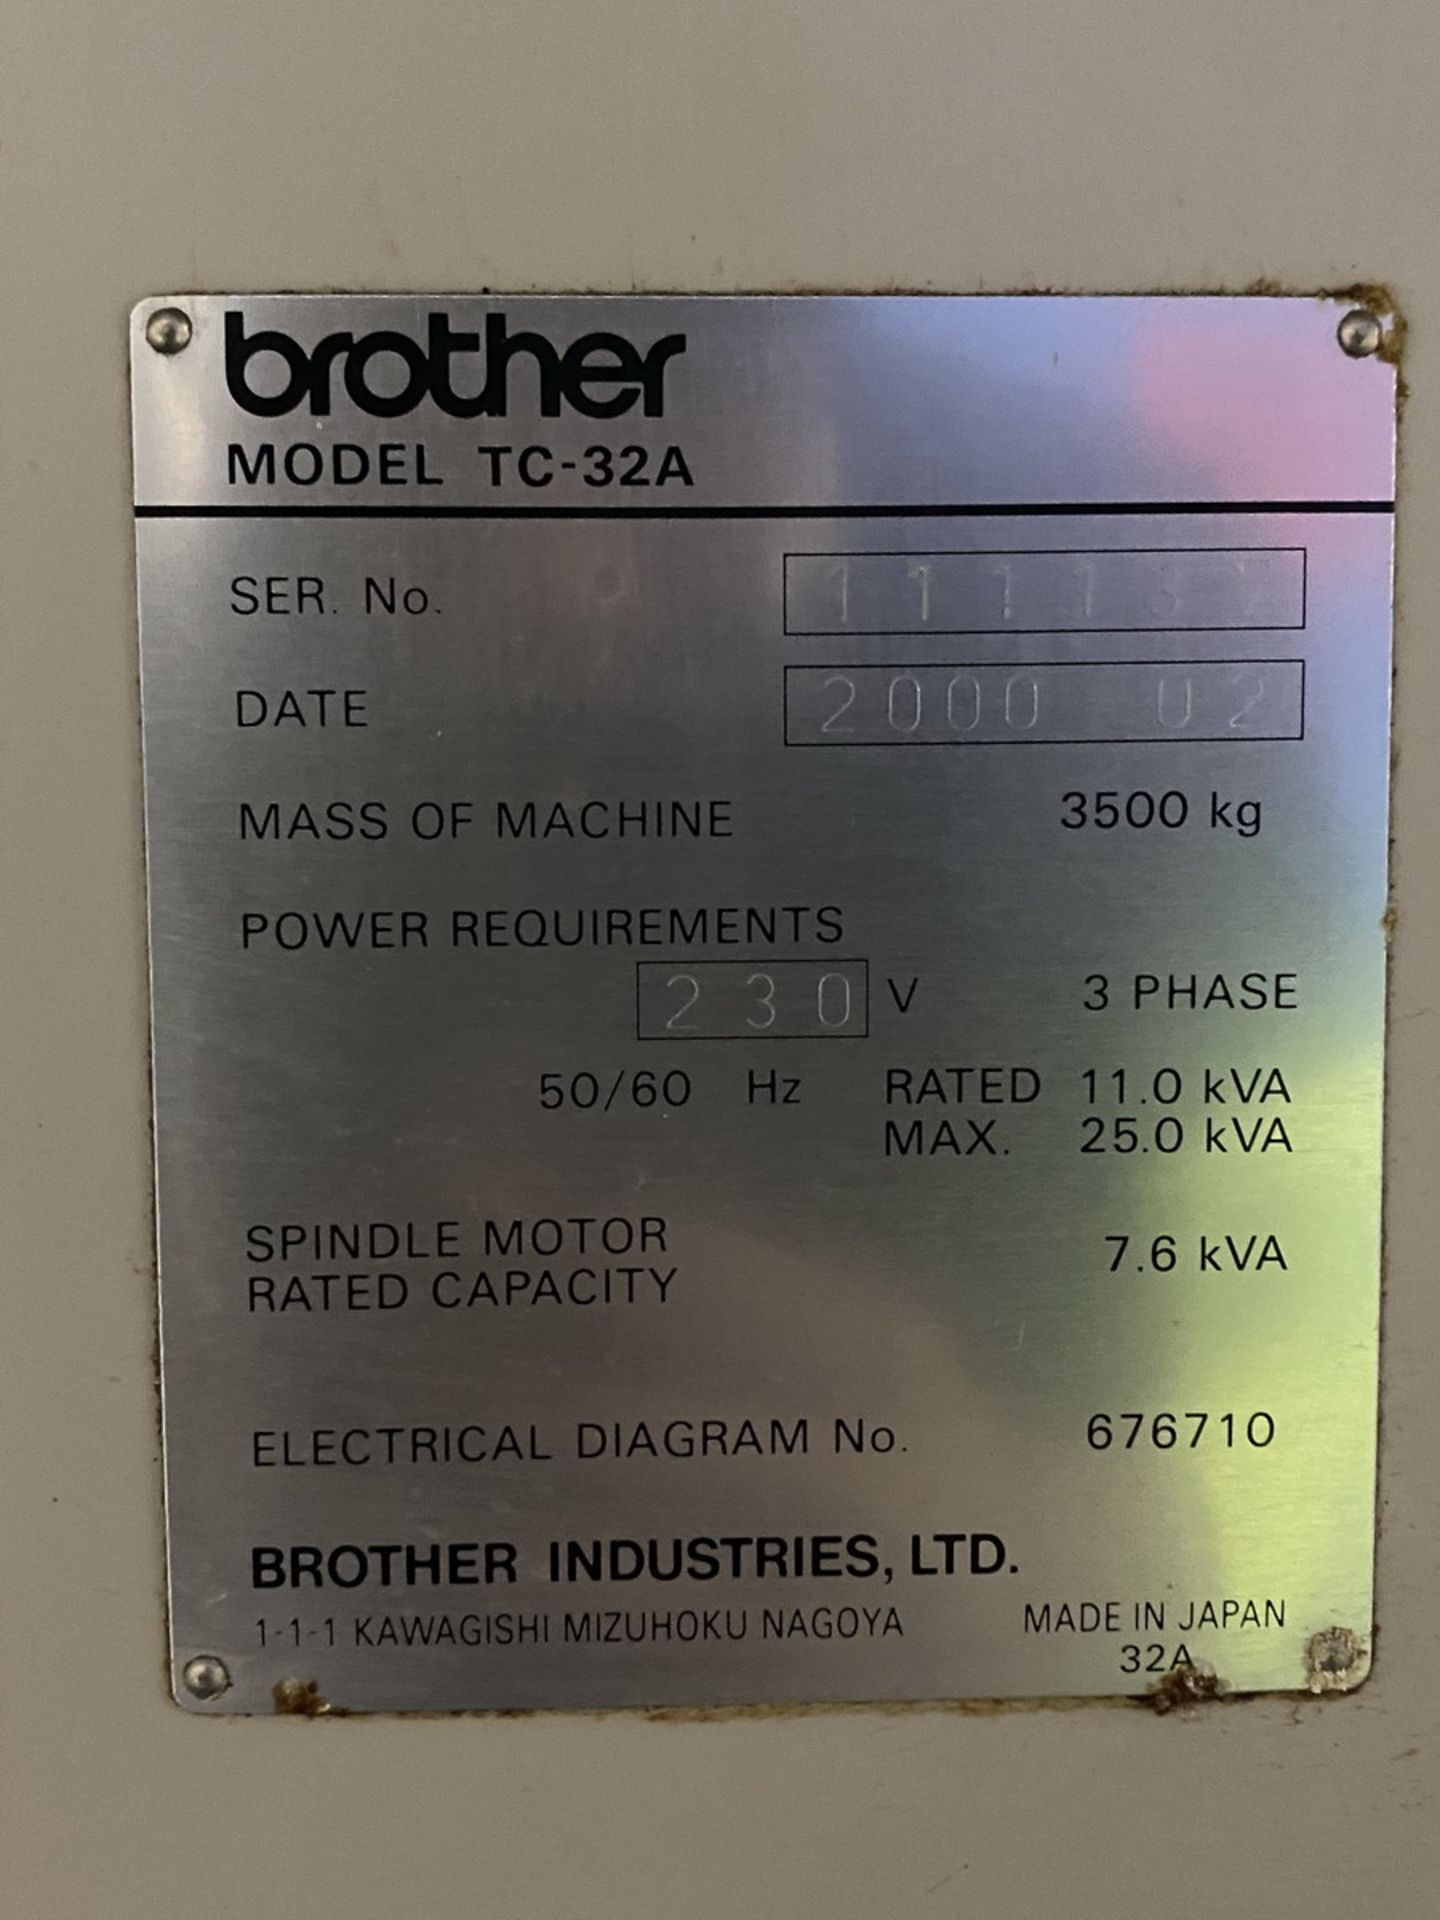 Brother Model TC-32A CNC Drilling & Tapping Center, S/N: 111137 (2000); with 18-Position ATC, - Image 7 of 7